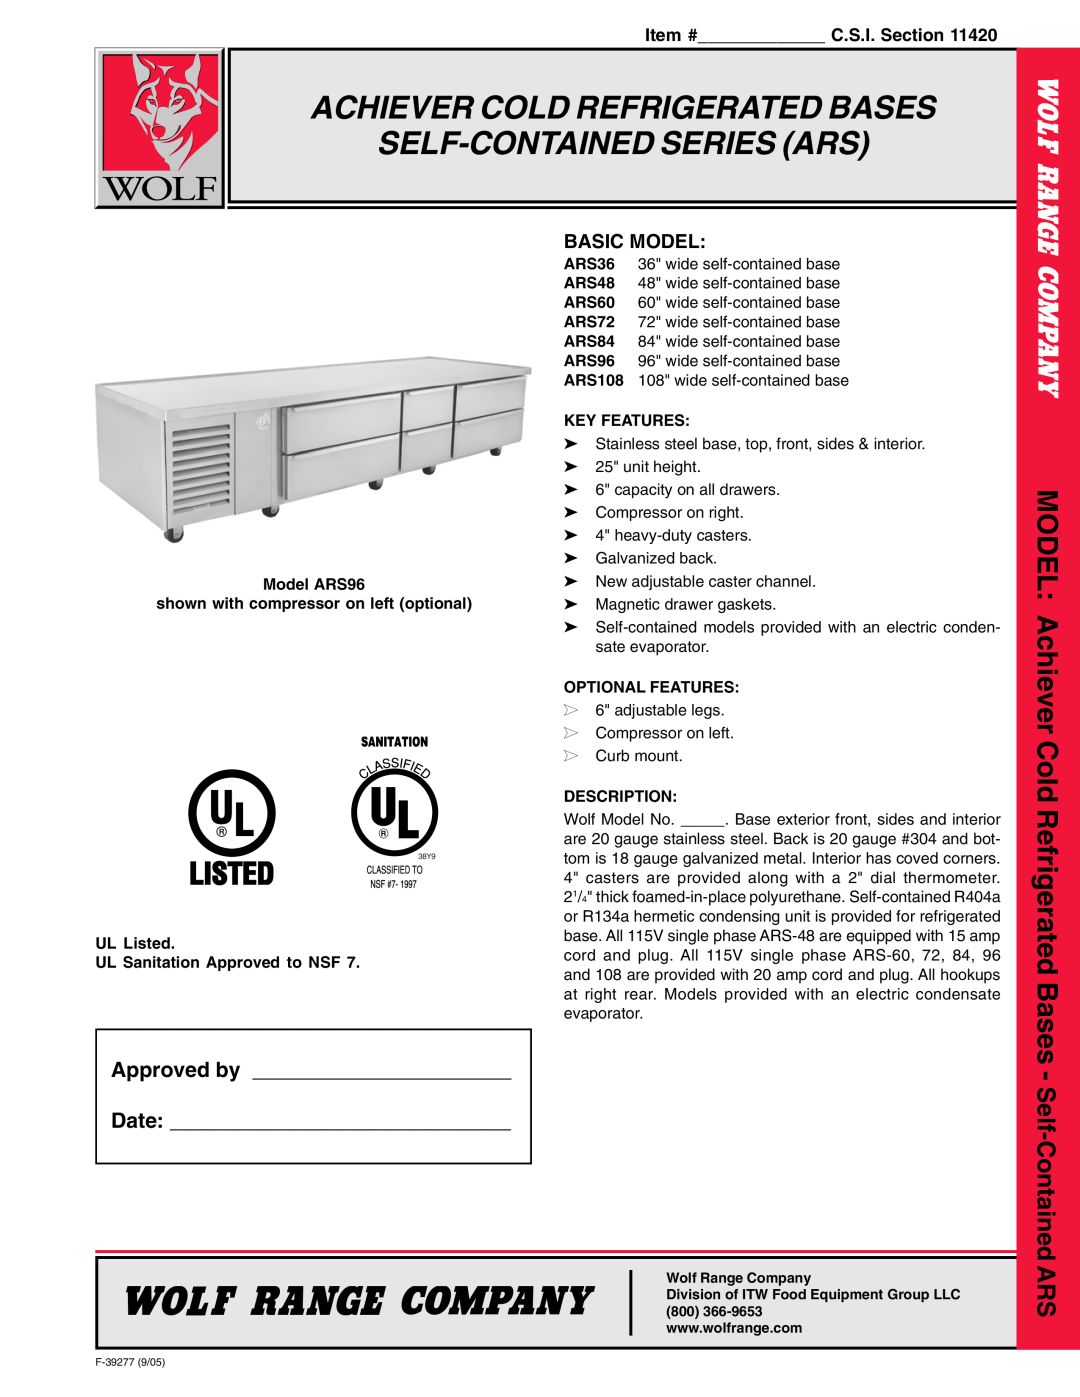 Wolf ARS48 manual Achiever Cold Refrigerated Bases Self-Contained Series Ars, Item # C.S.I. Section, MODEL Achiever Cold 